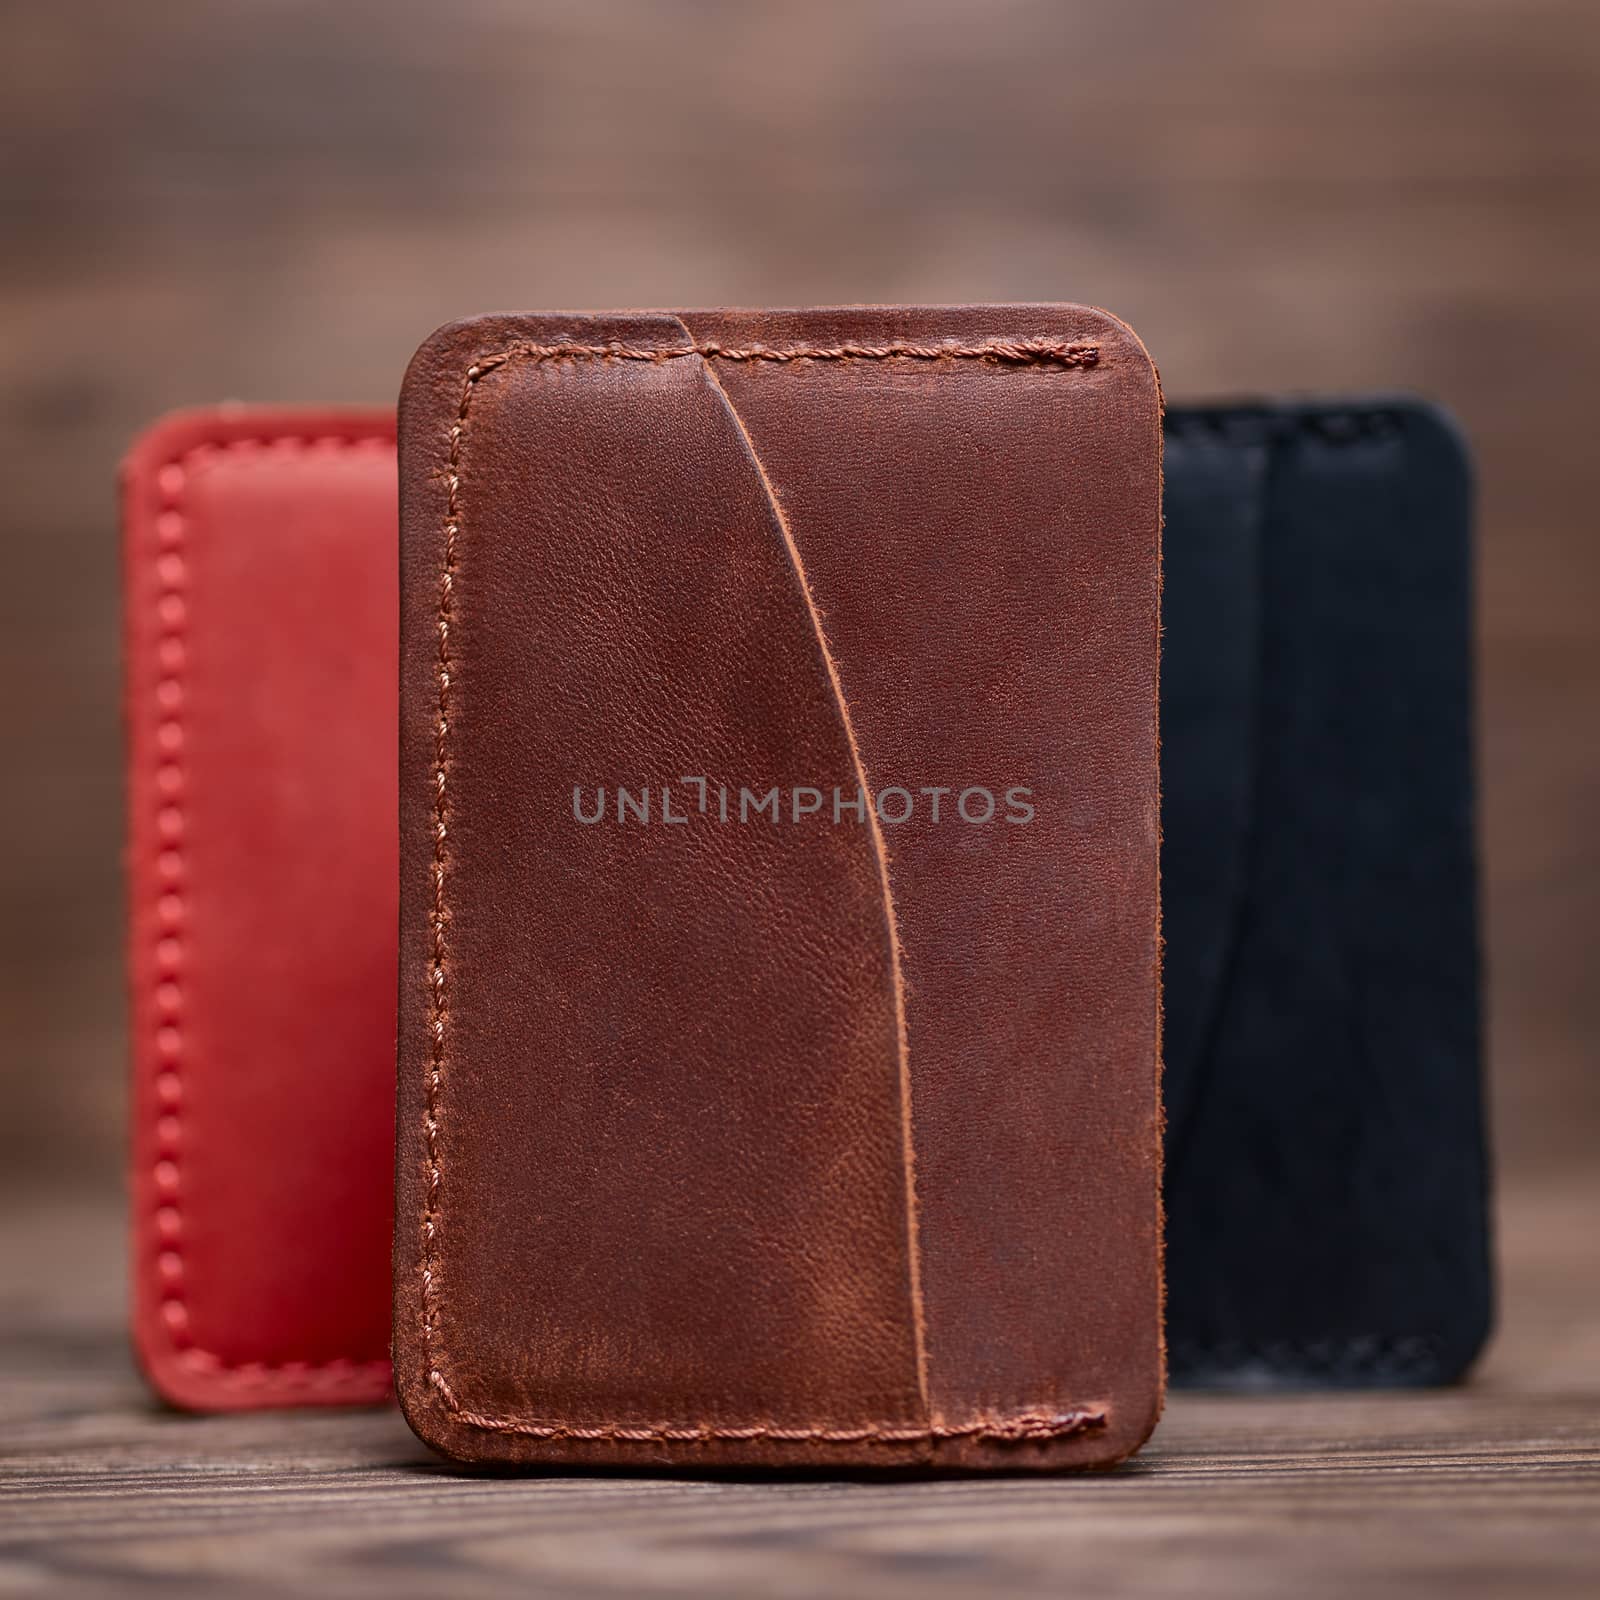 One pocket ginger colour leather handmade cardholder. On blurred background stay other colour cardholders. Stock photo on blurred background.